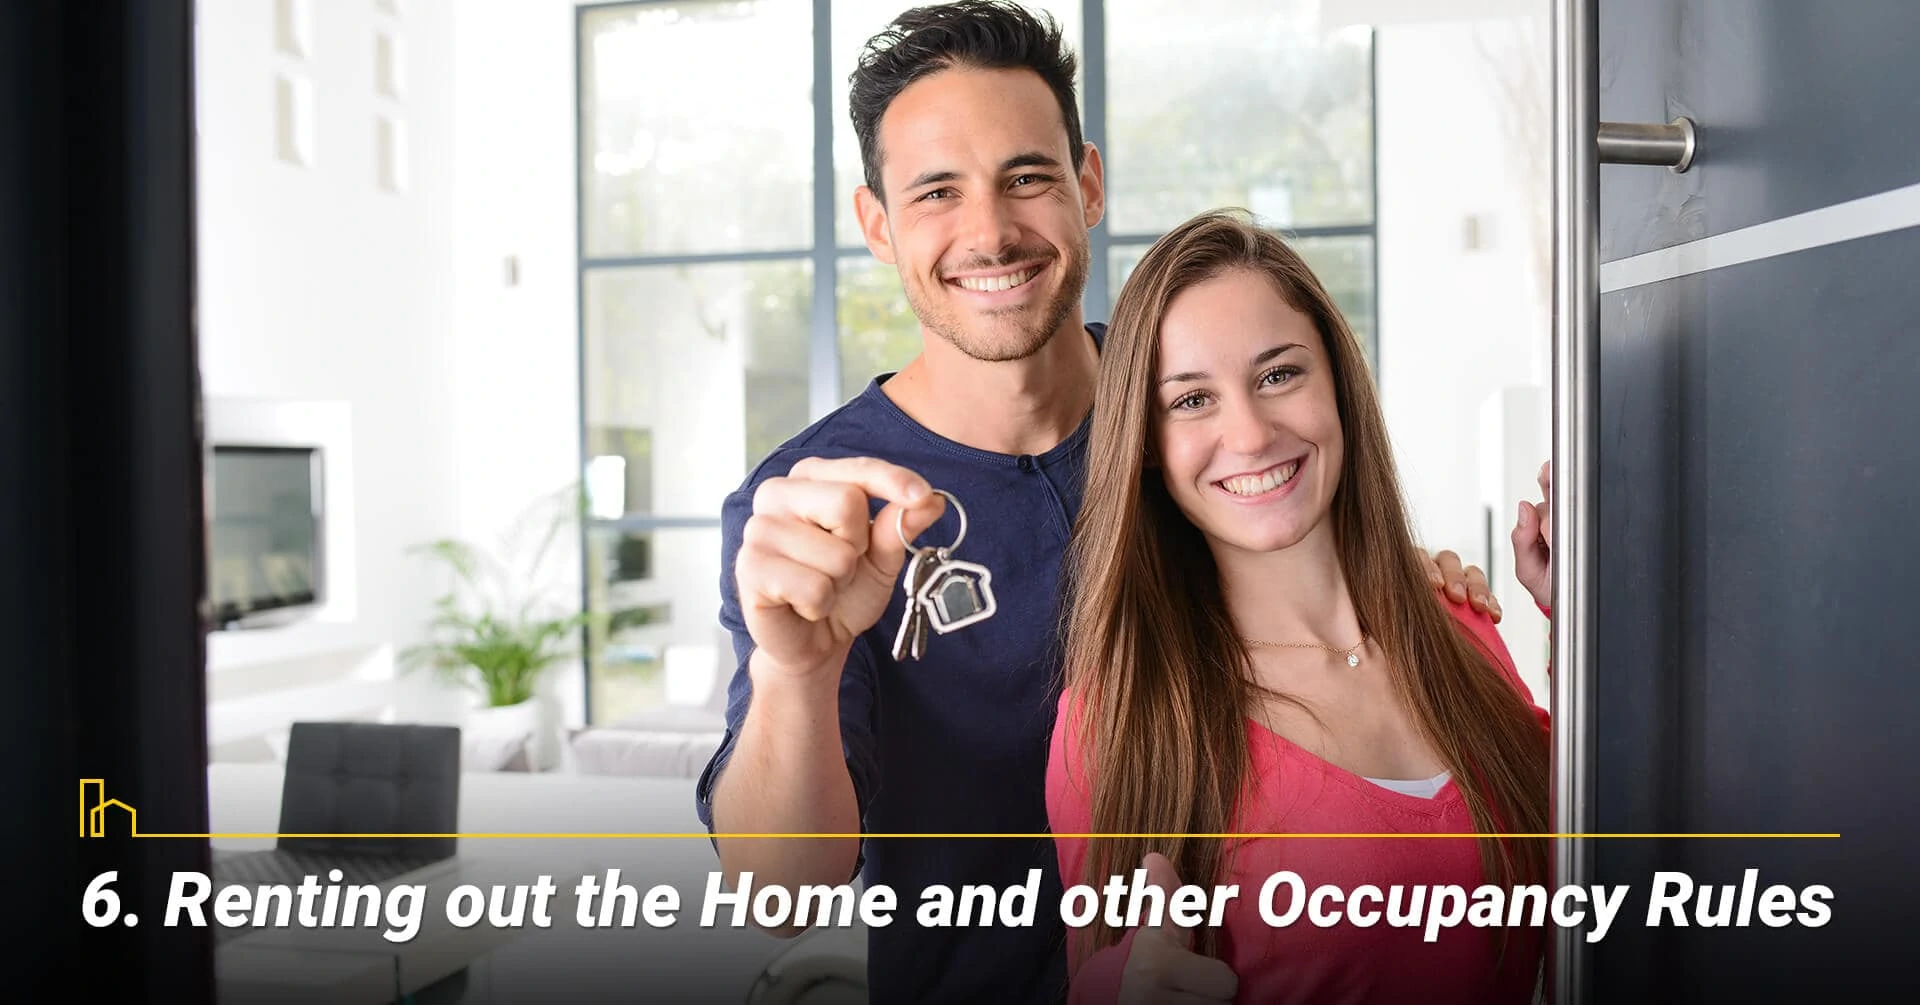 Renting out the Home and other Occupancy Rules, rules for renting out your home